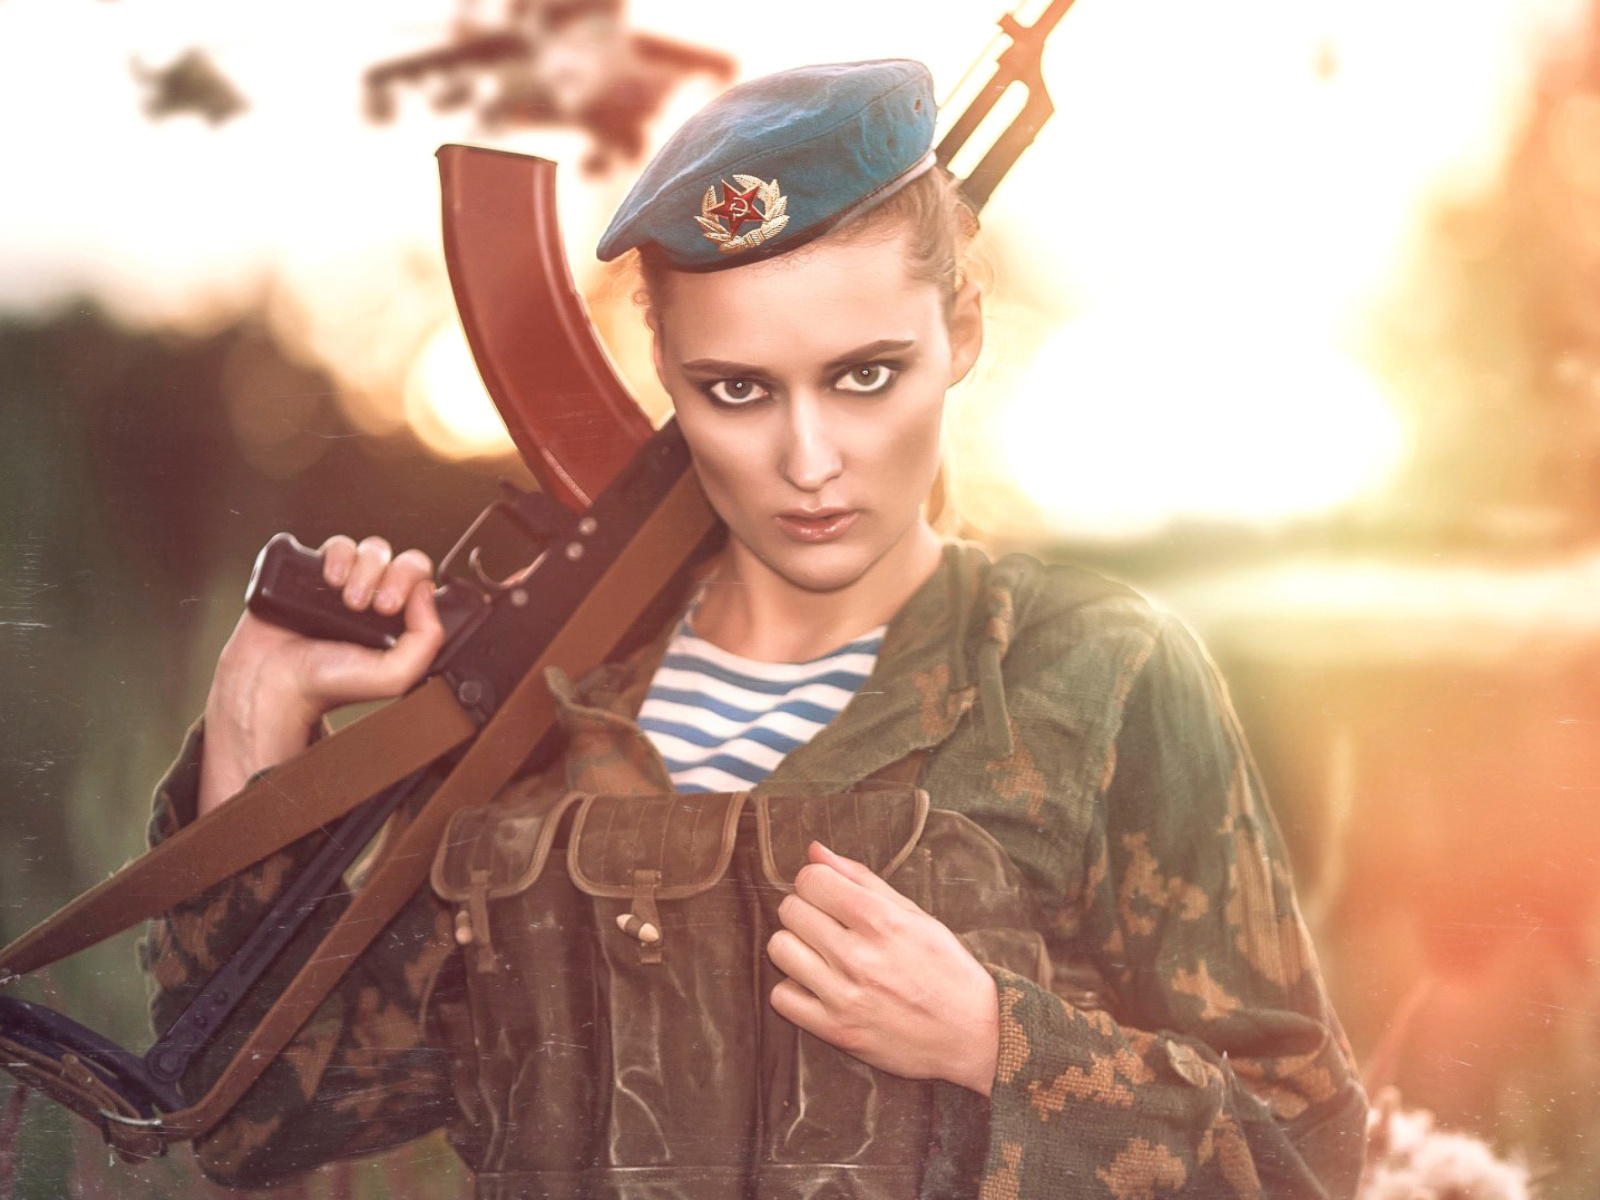 Russian Girl and Weapon HD wallpaper 1600x1200